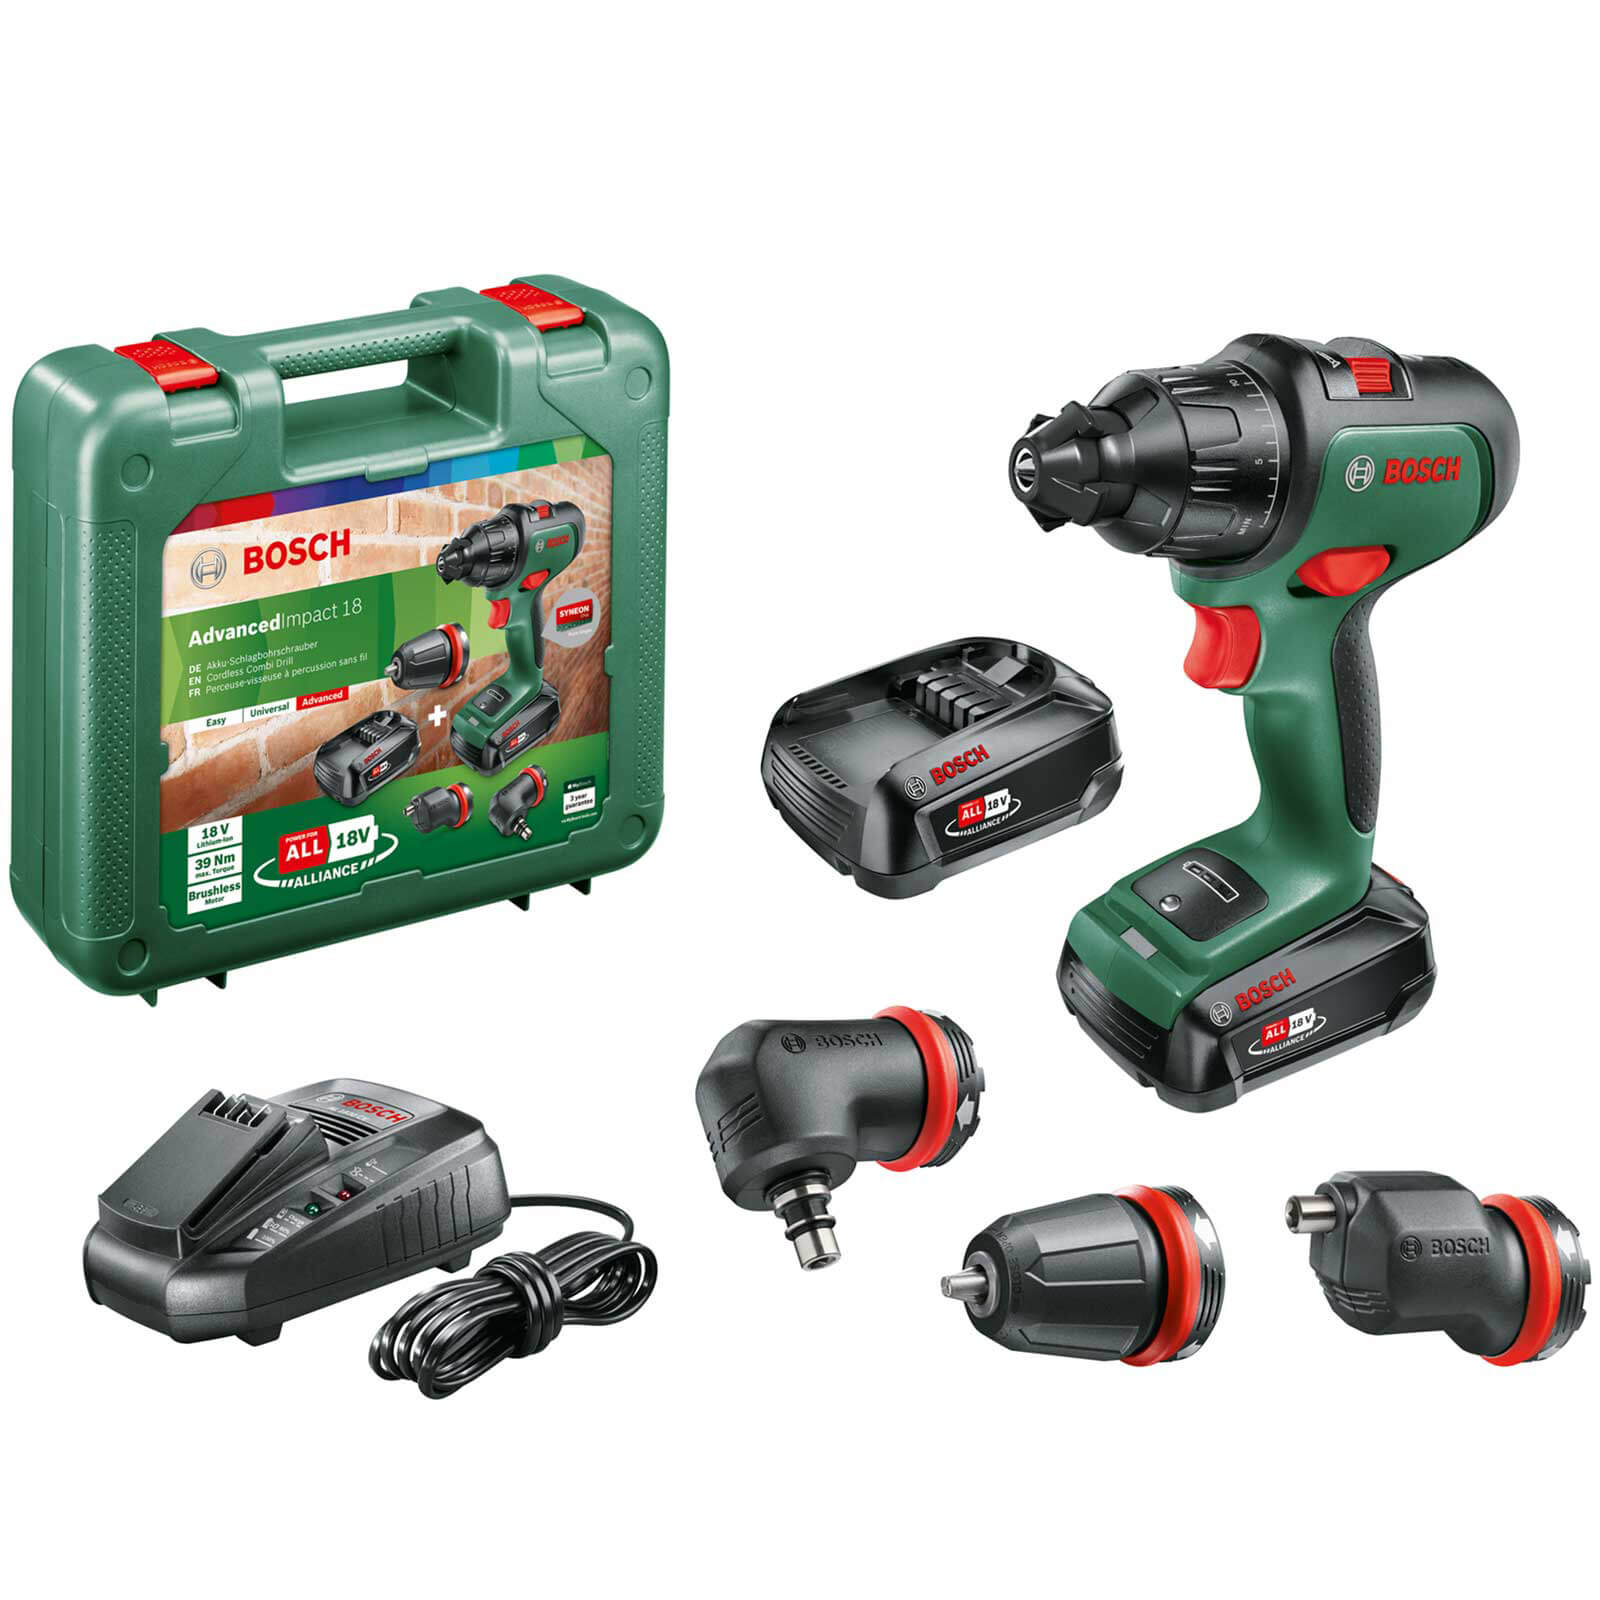 Image of Bosch ADVANCEDIMPACT 18v Cordless Combi Drill and Attachments 2 x 2.5ah Li-ion Charger Case